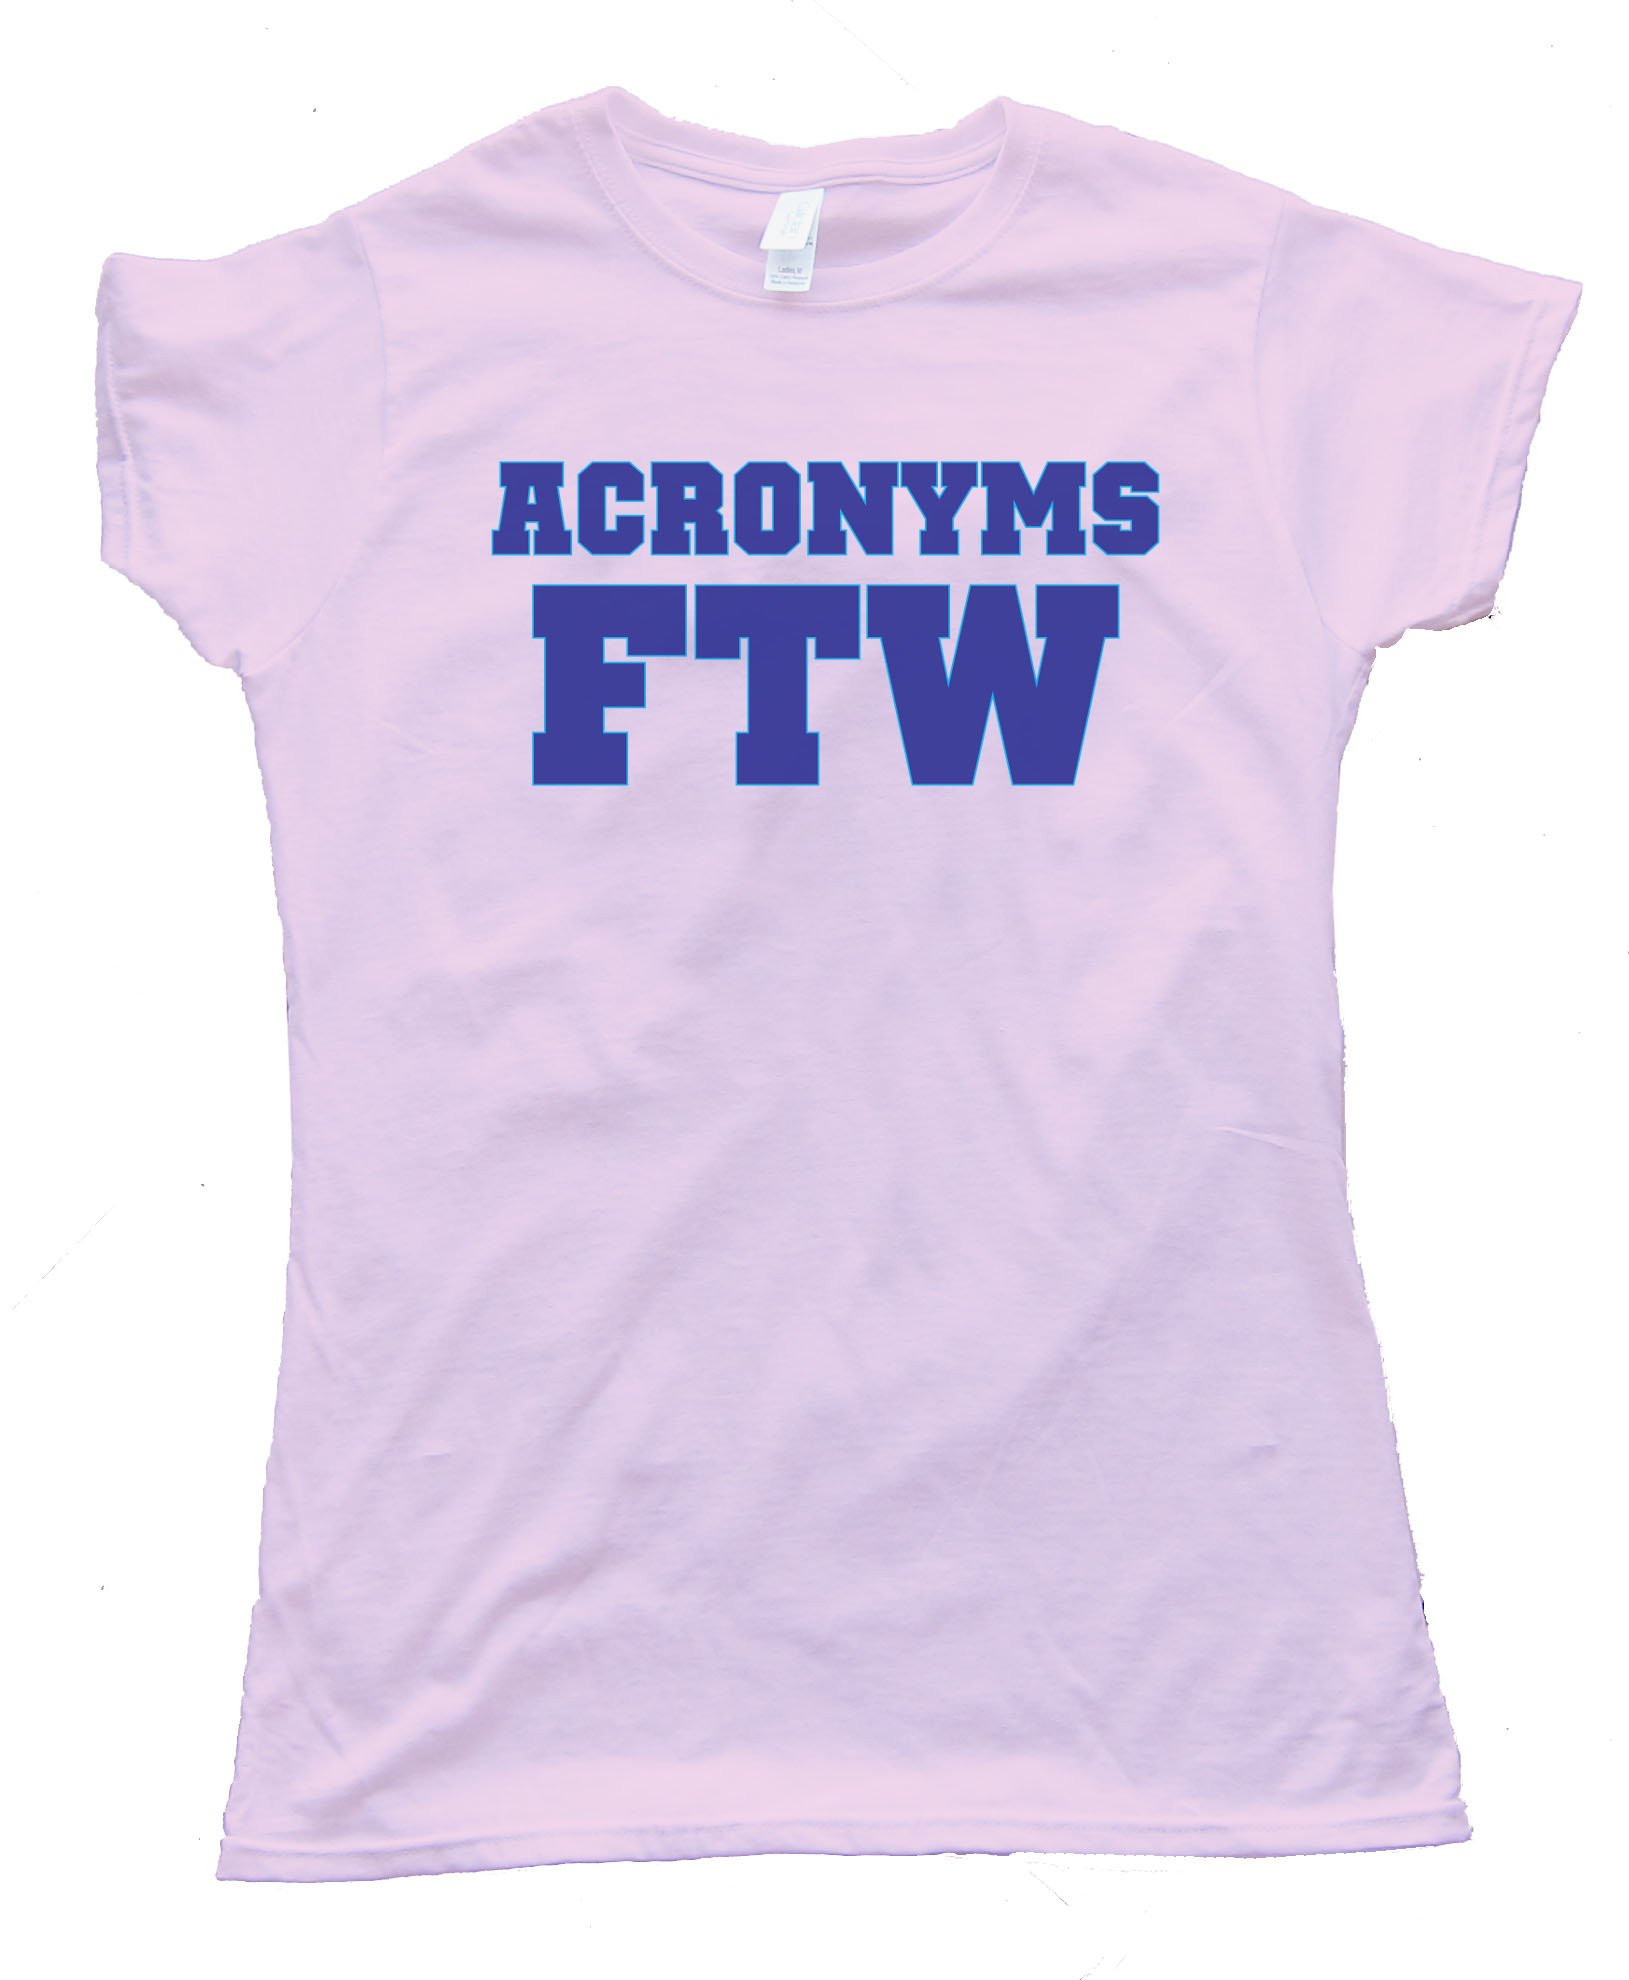 Womens Acronyms Ftw - For The Win - Tee Shirt